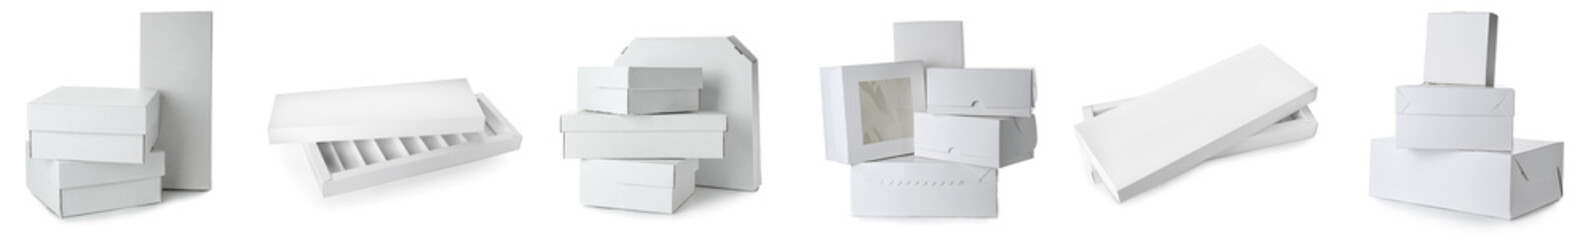 Set of cardboard boxes on white background